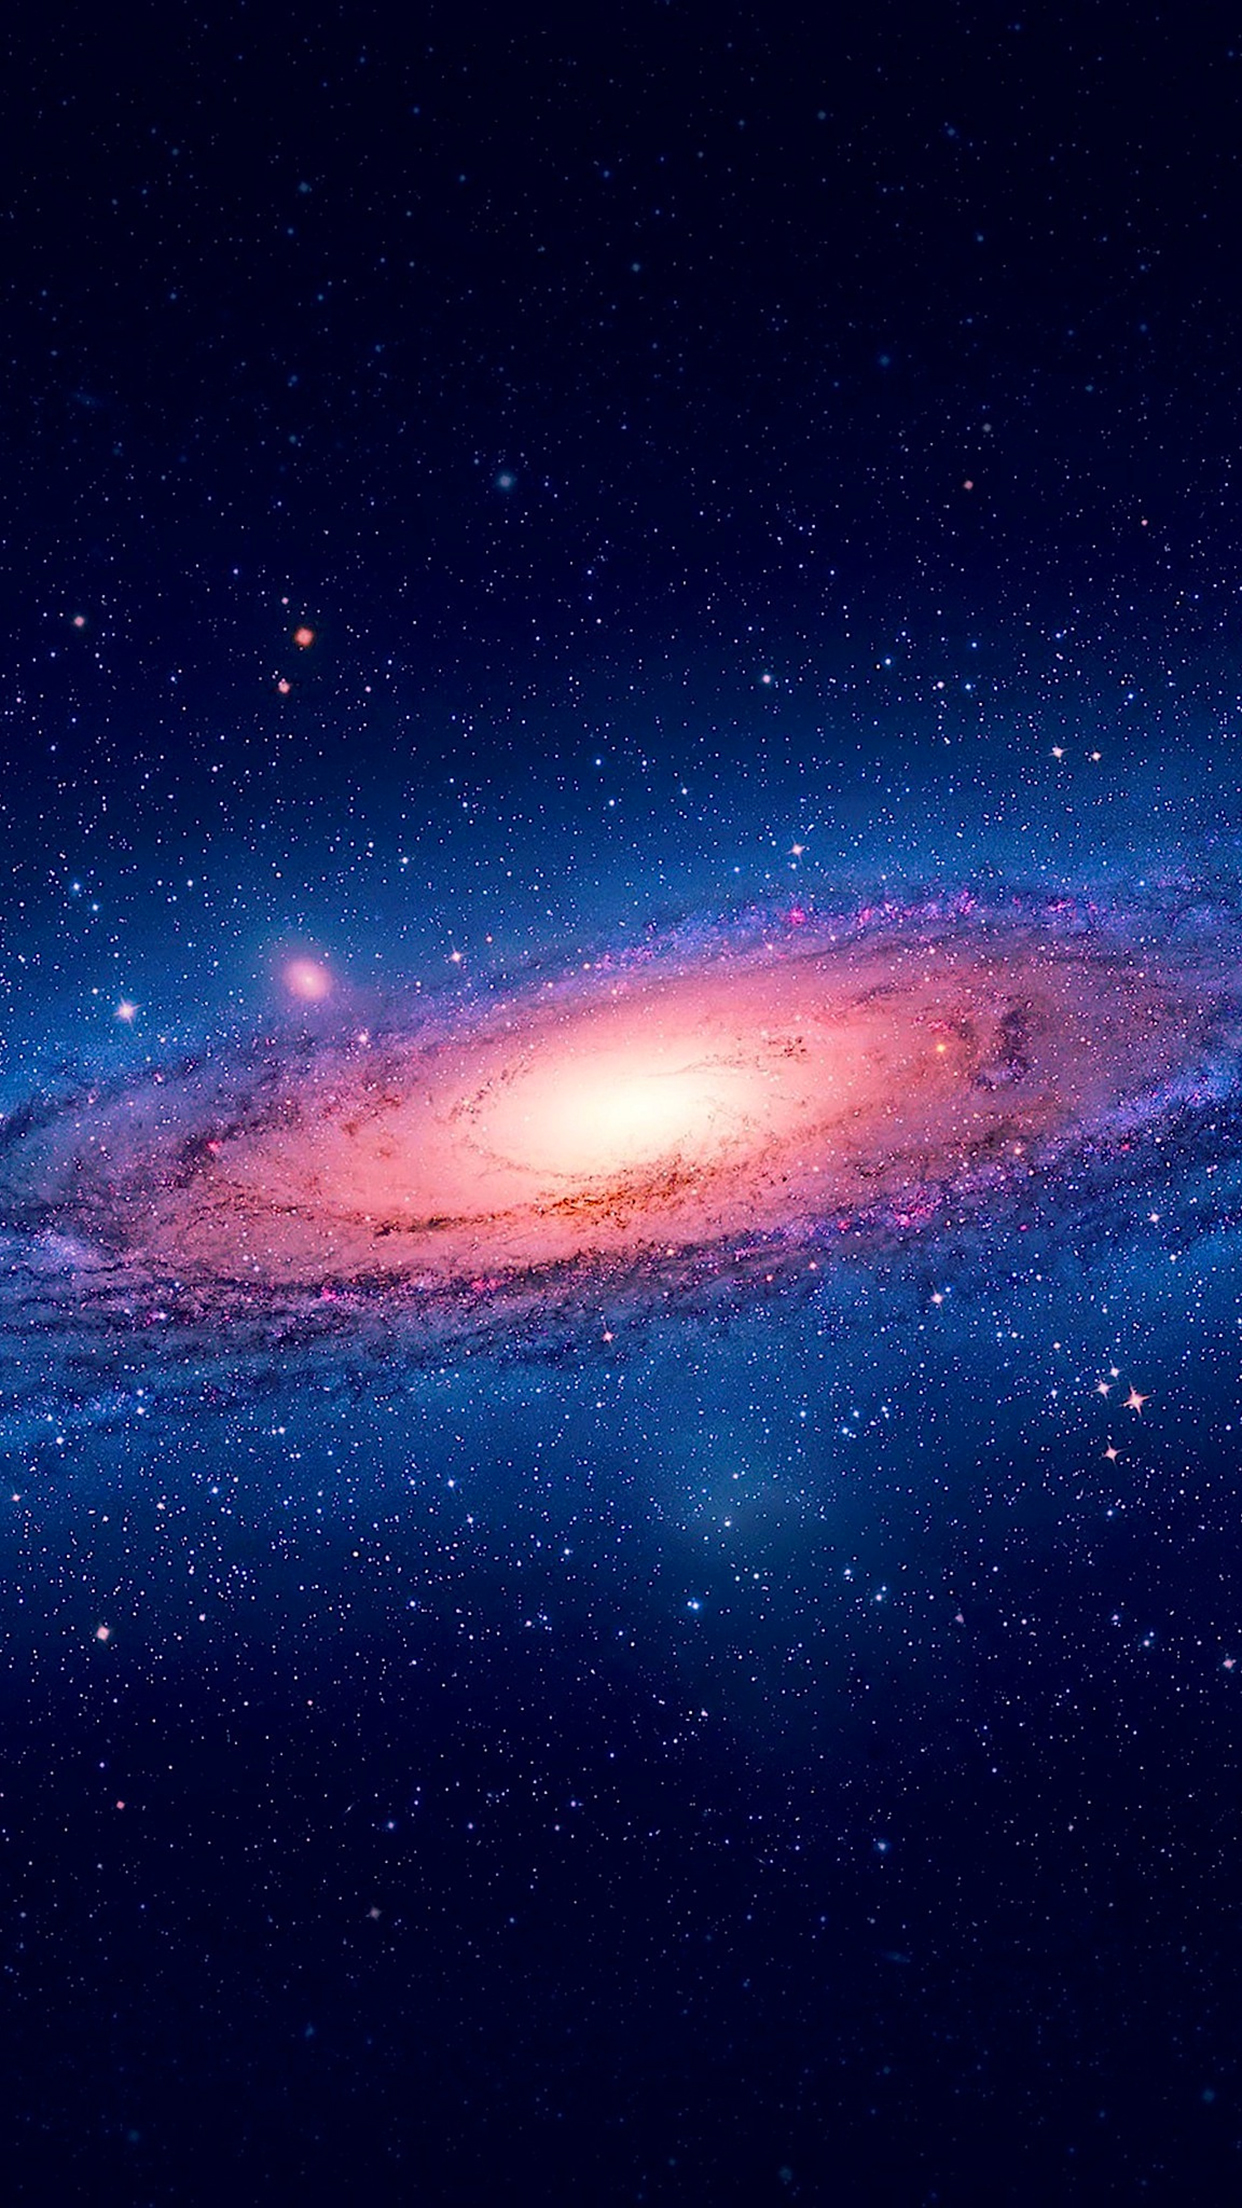 Cool Lion Galaxy Wallpapers